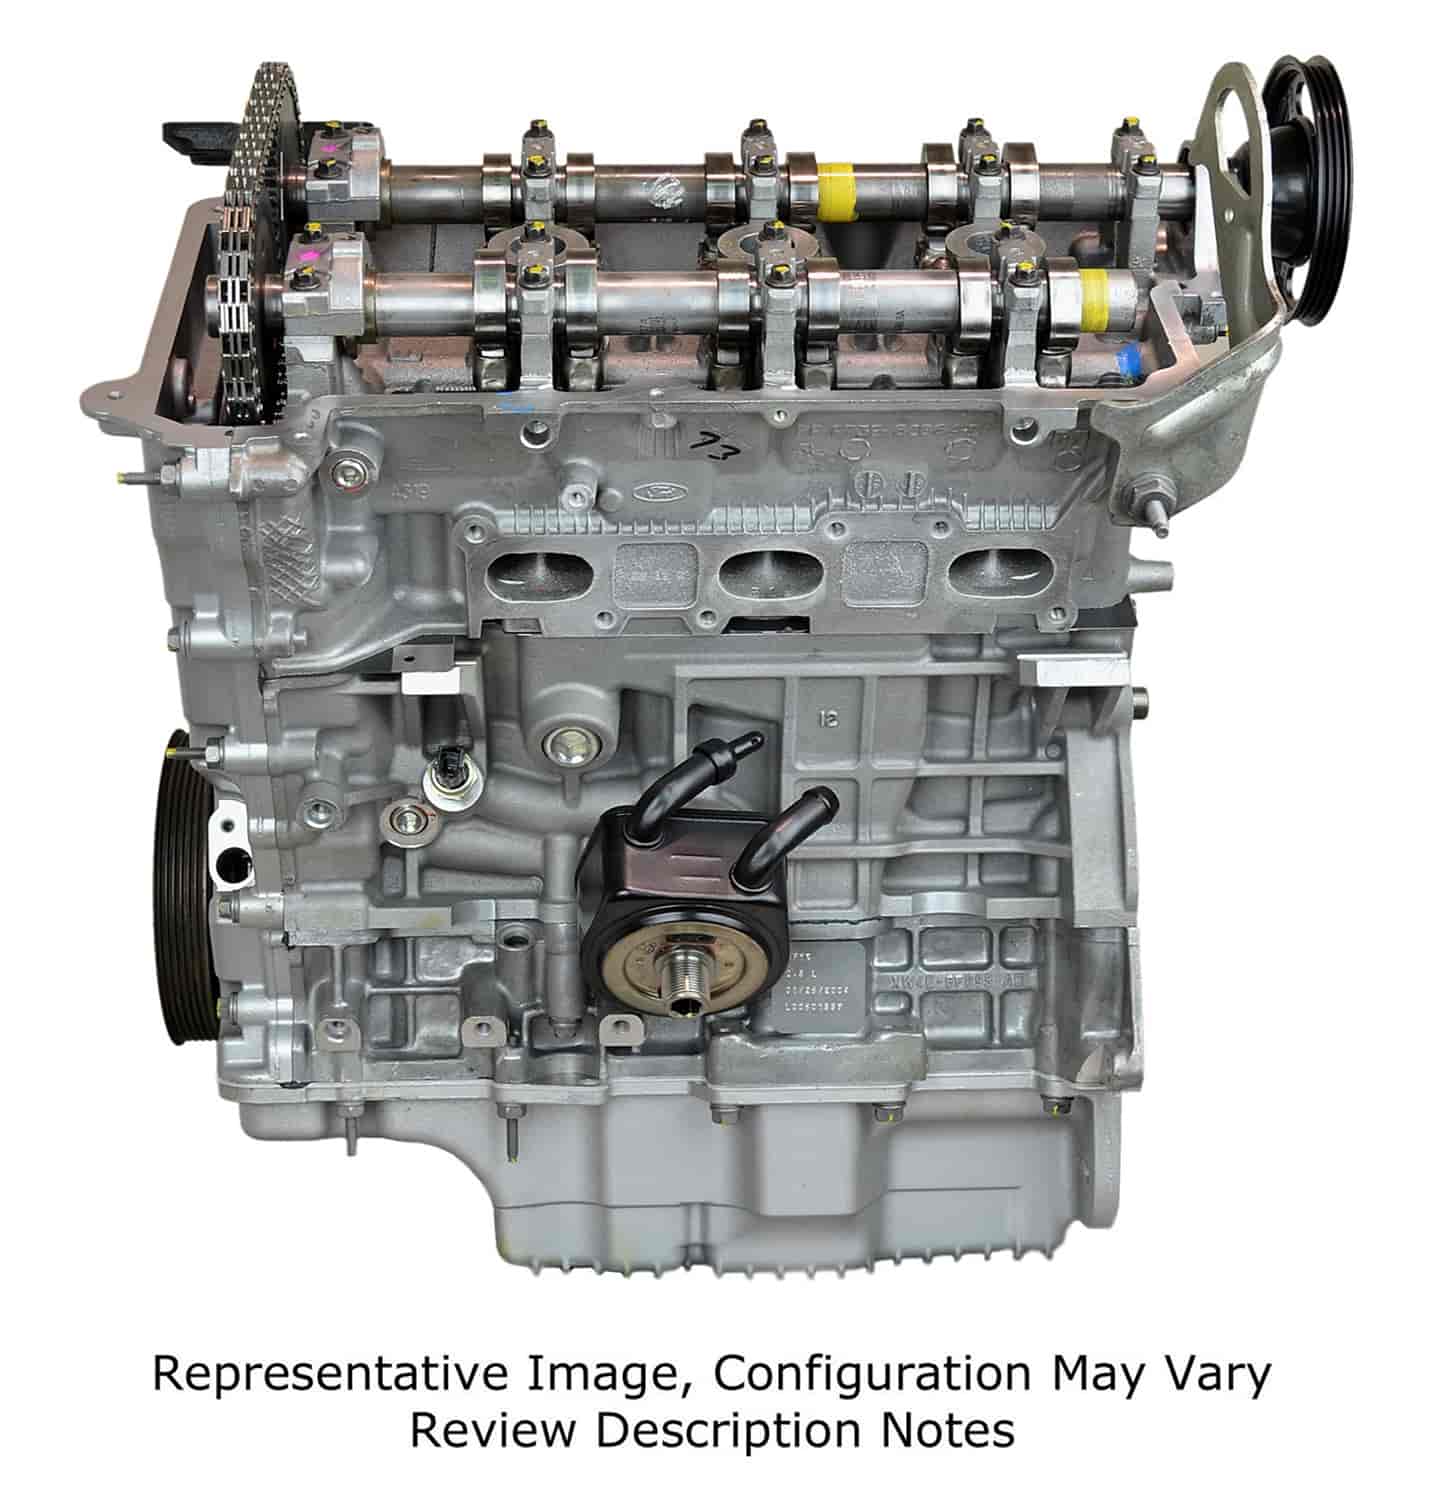 Remanufactured Crate Engine for 1999 Ford Contour SVT with 2.5L V6